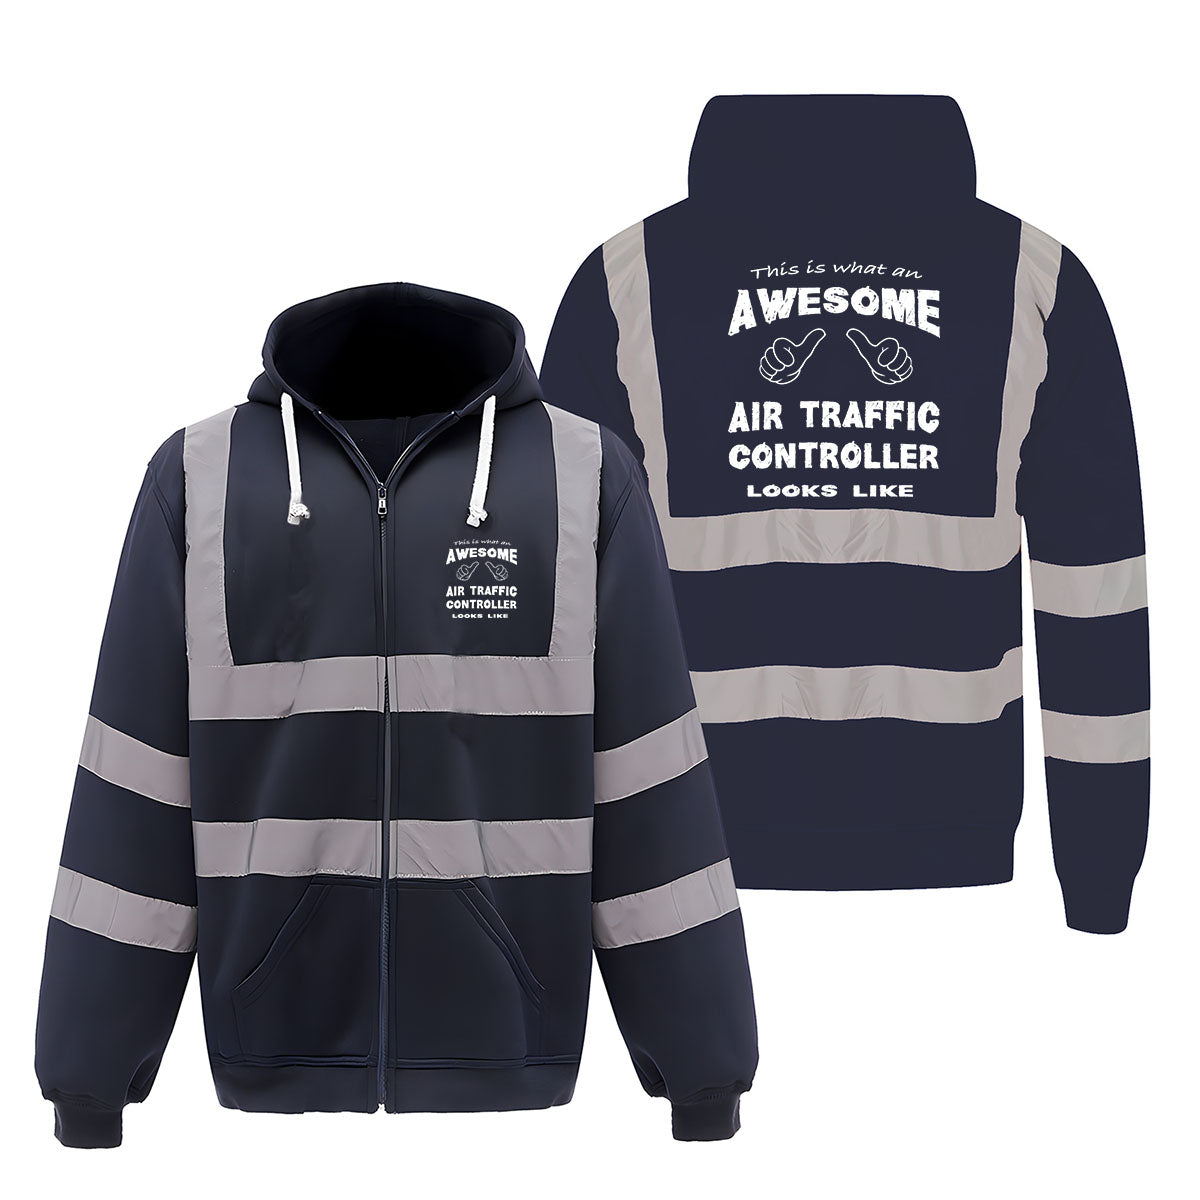 Air Traffic Controller Designed Reflective Zipped Hoodies